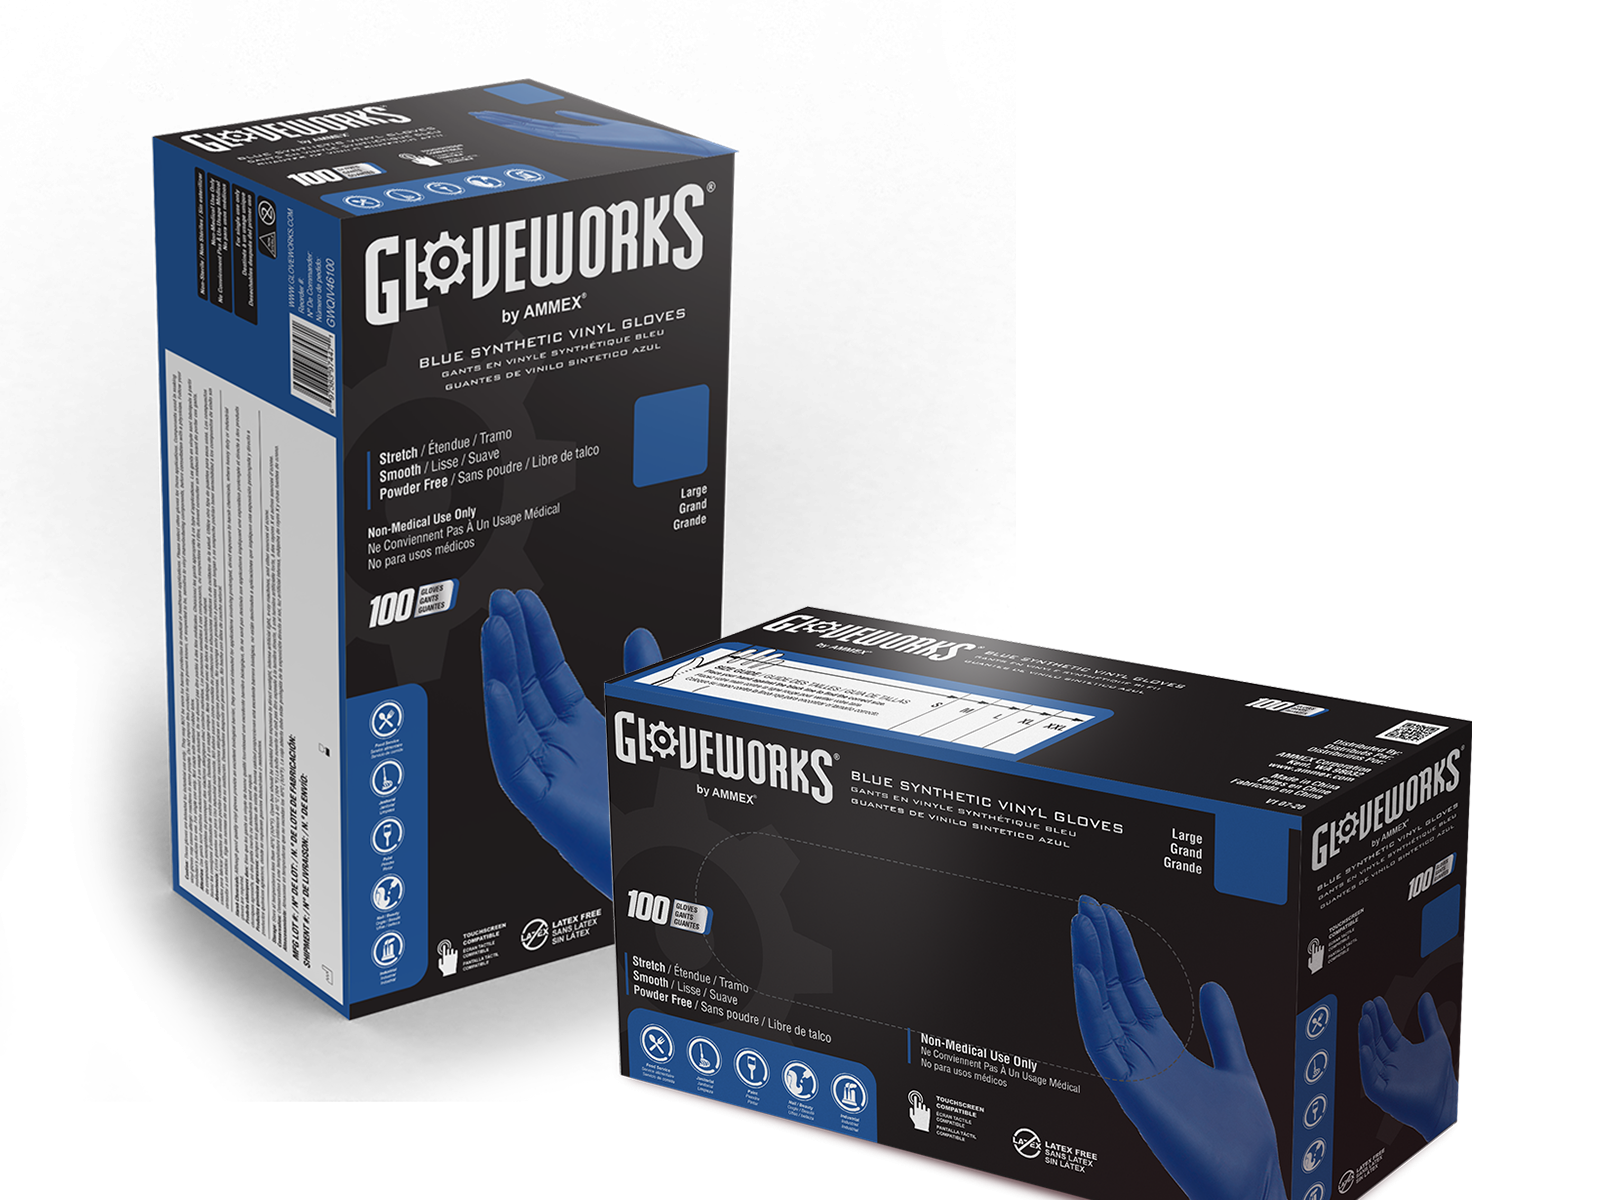 Gloveworks Industrial Blue Synthetic Vinyl Gloves from AMMEX are a great bridge between vinyl and nitrile gloves.